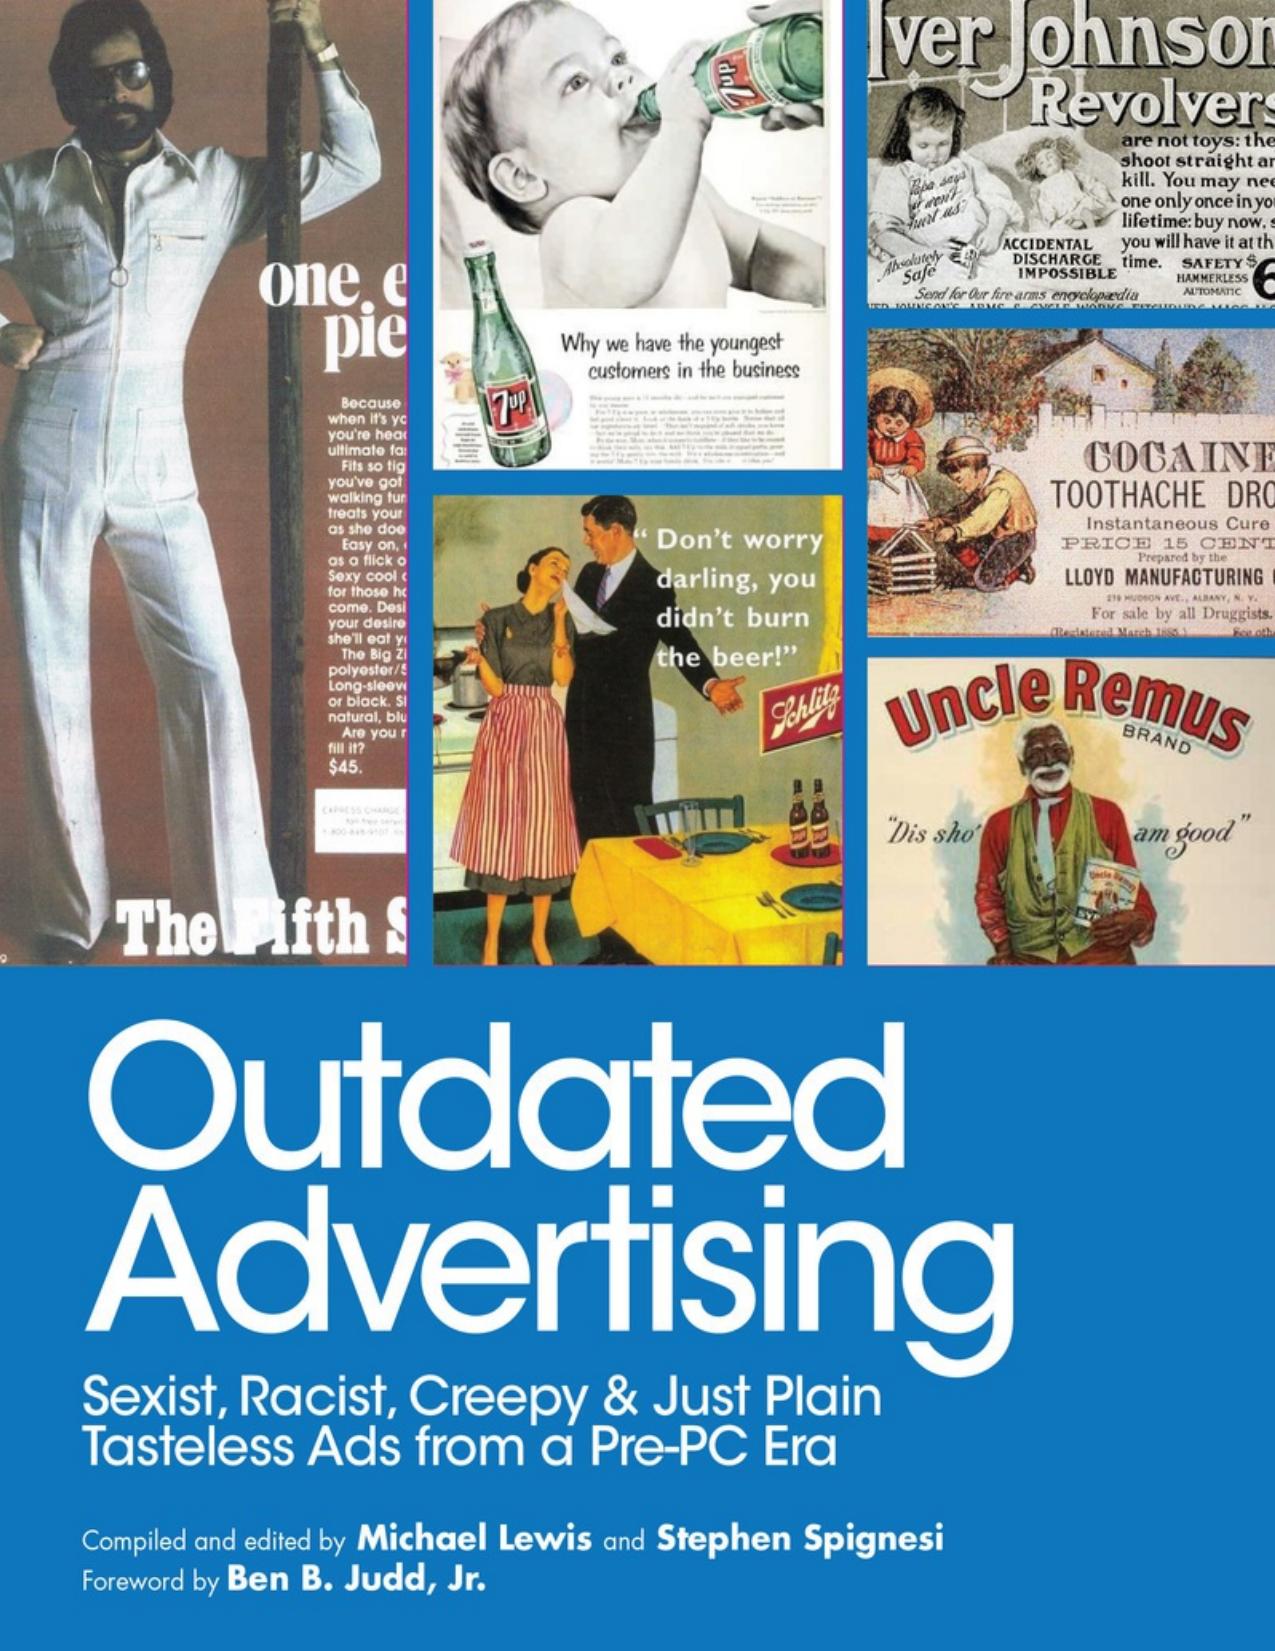 Outdated Advertising by Michael Lewis